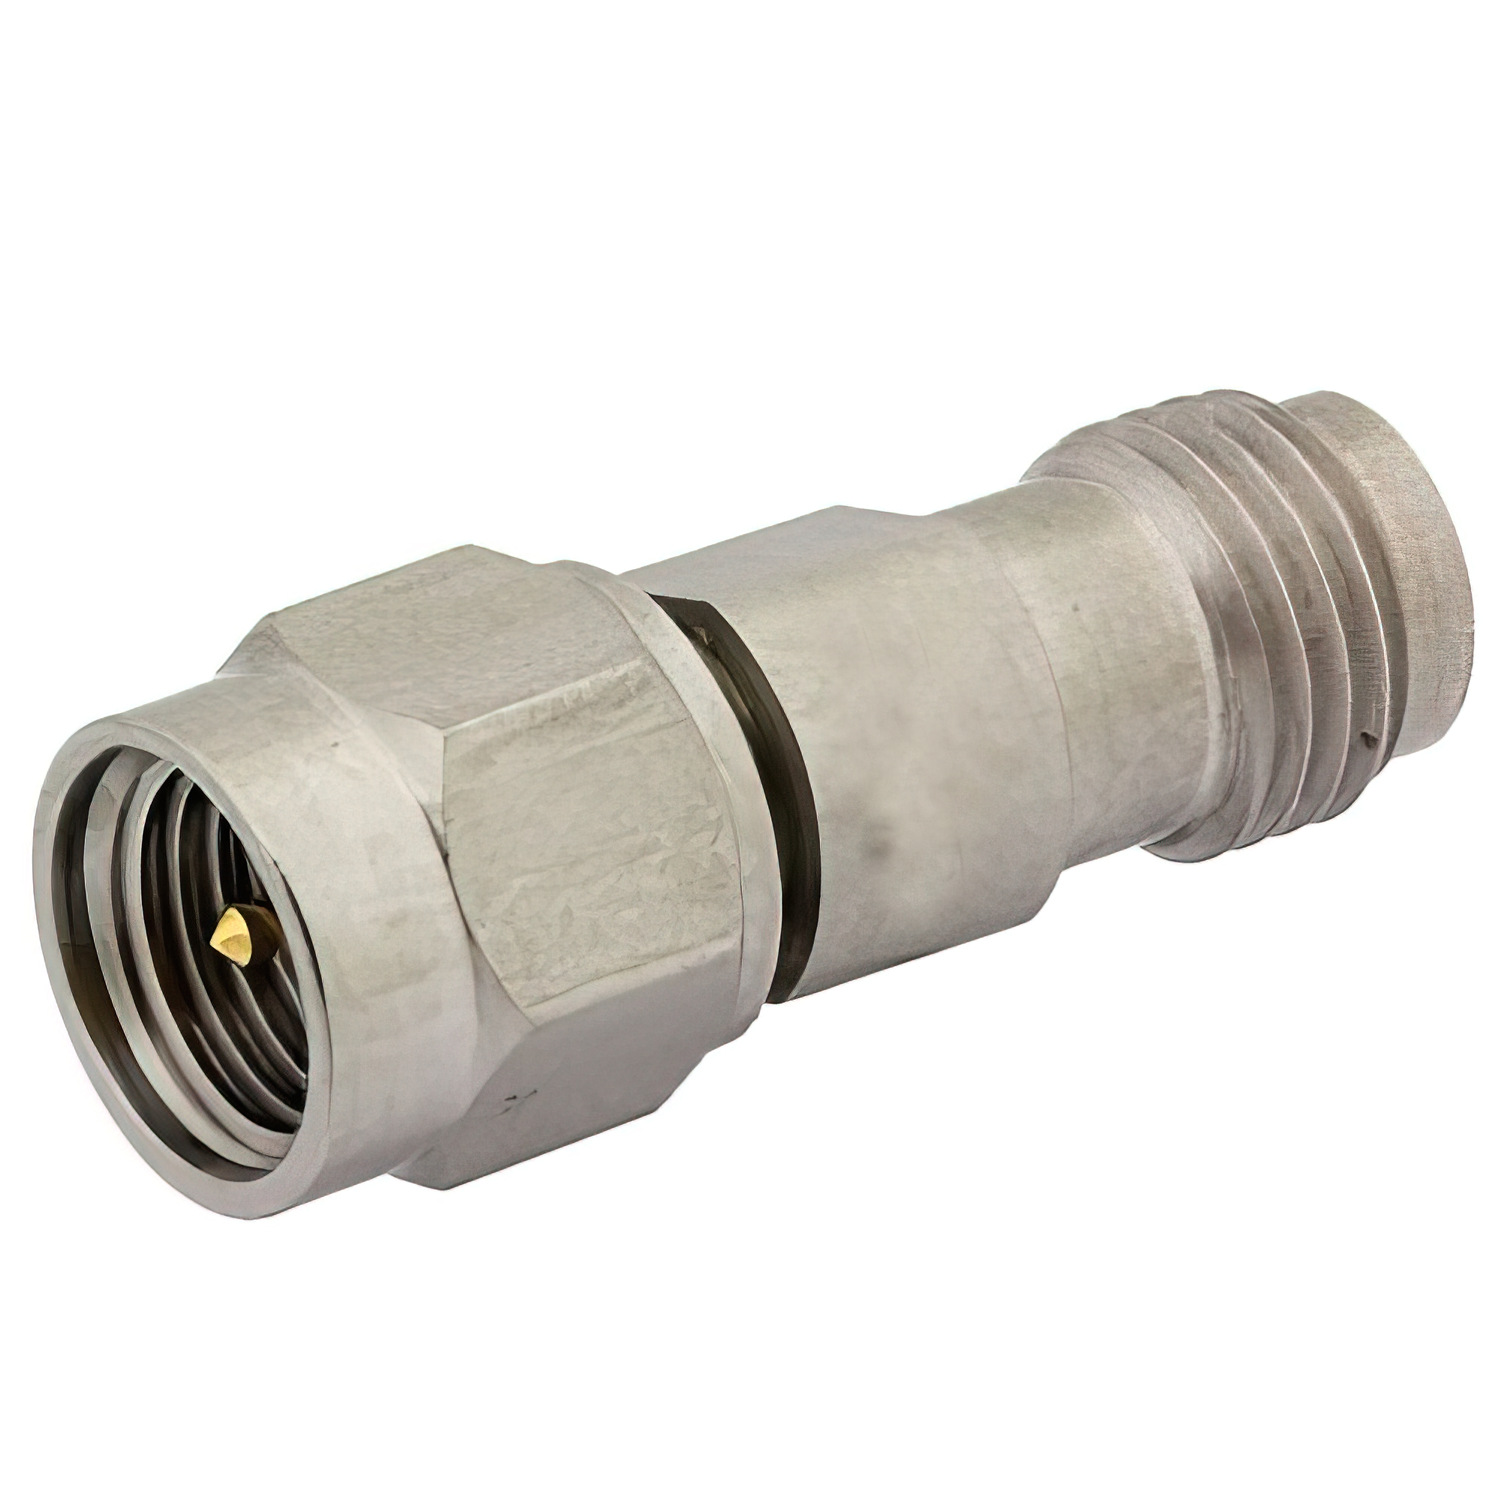 3.5mm male to 1.85mm female adapter1